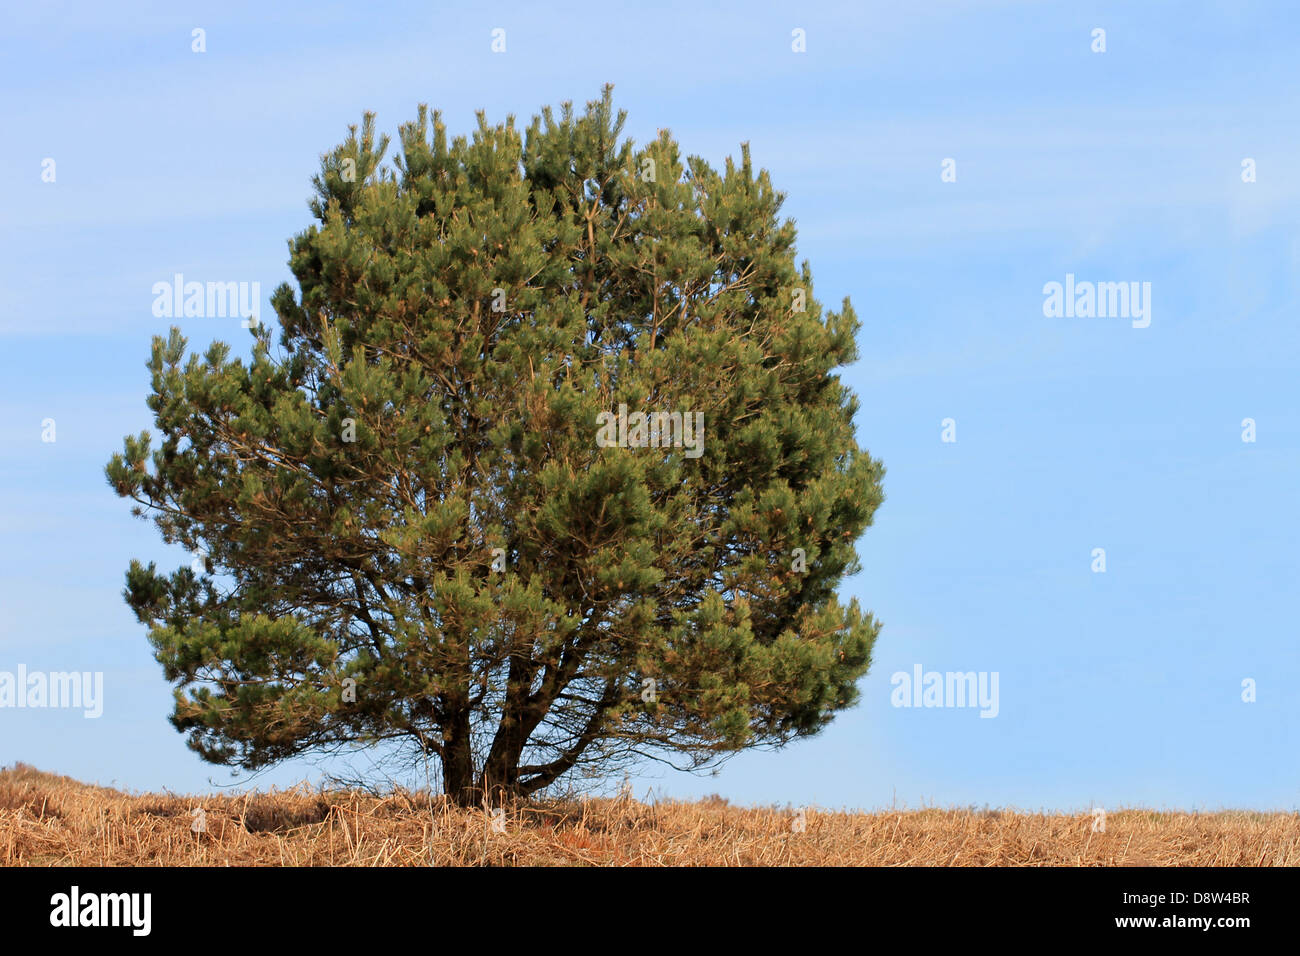 Lone tree in countryside with blue sky background. Stock Photo